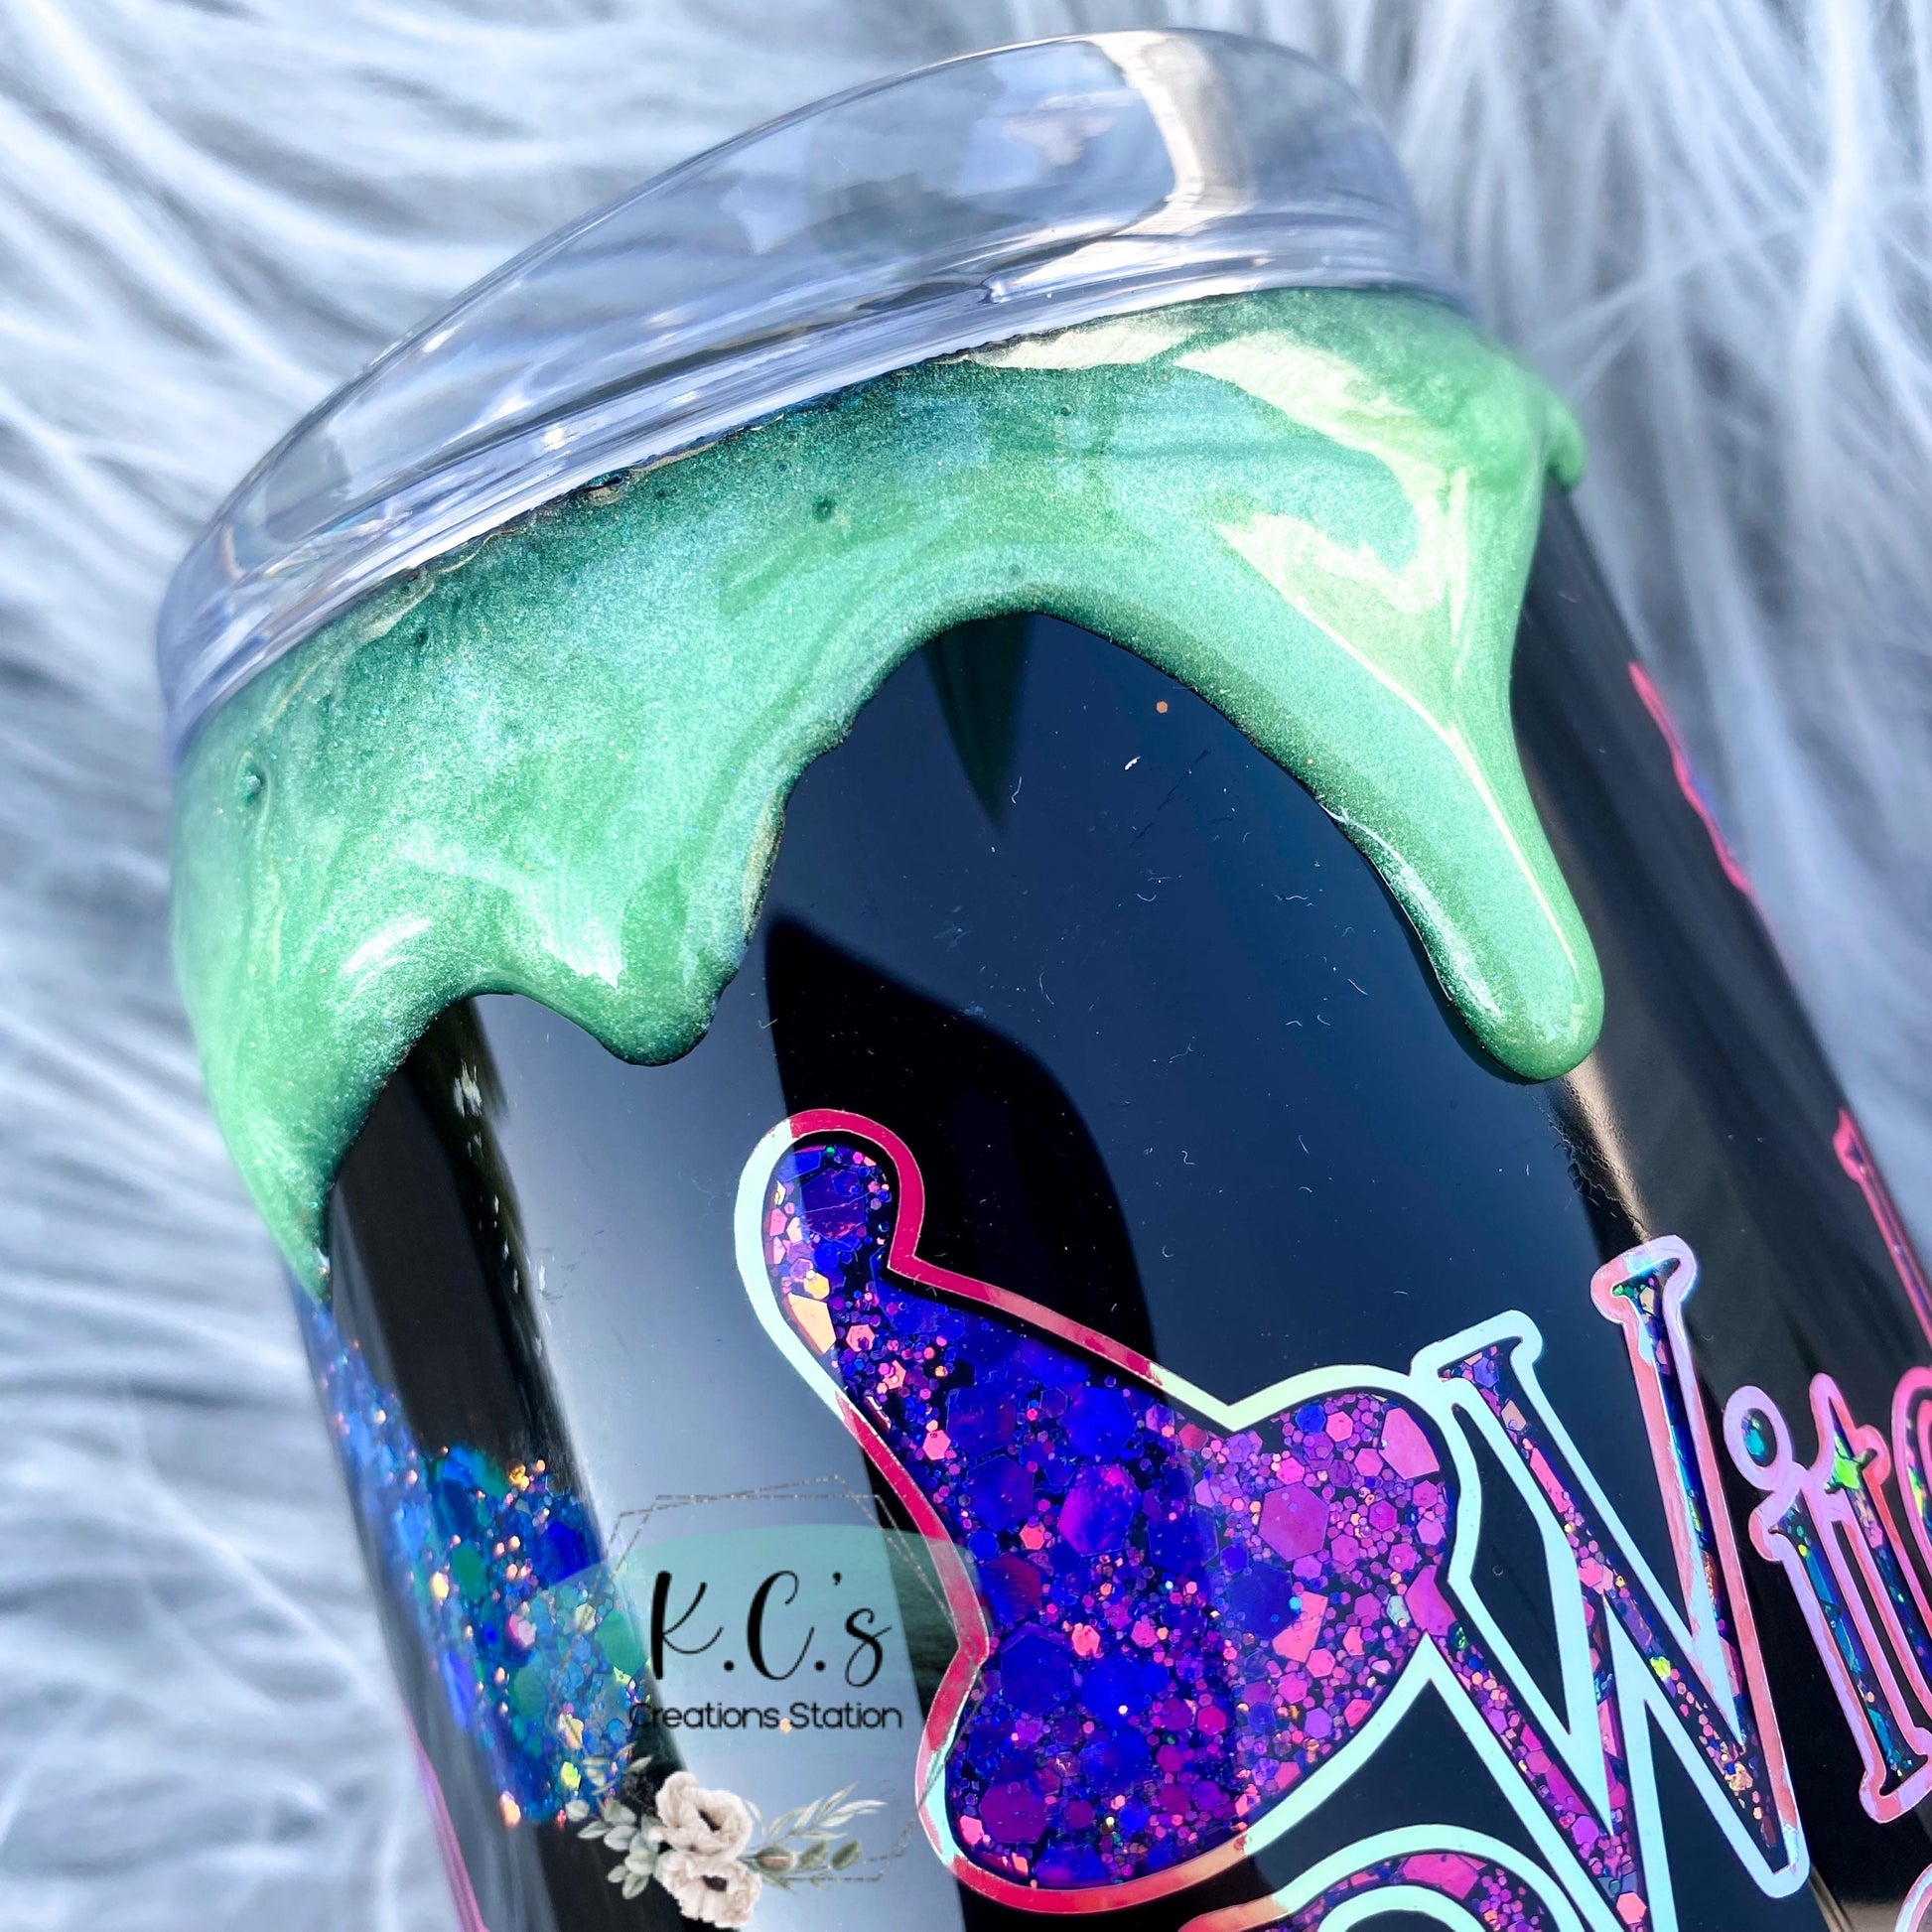 16oz Halloween Iridescent Glass Tumbler With Cauldron Straw Charm. – Just  For Lookz Creations